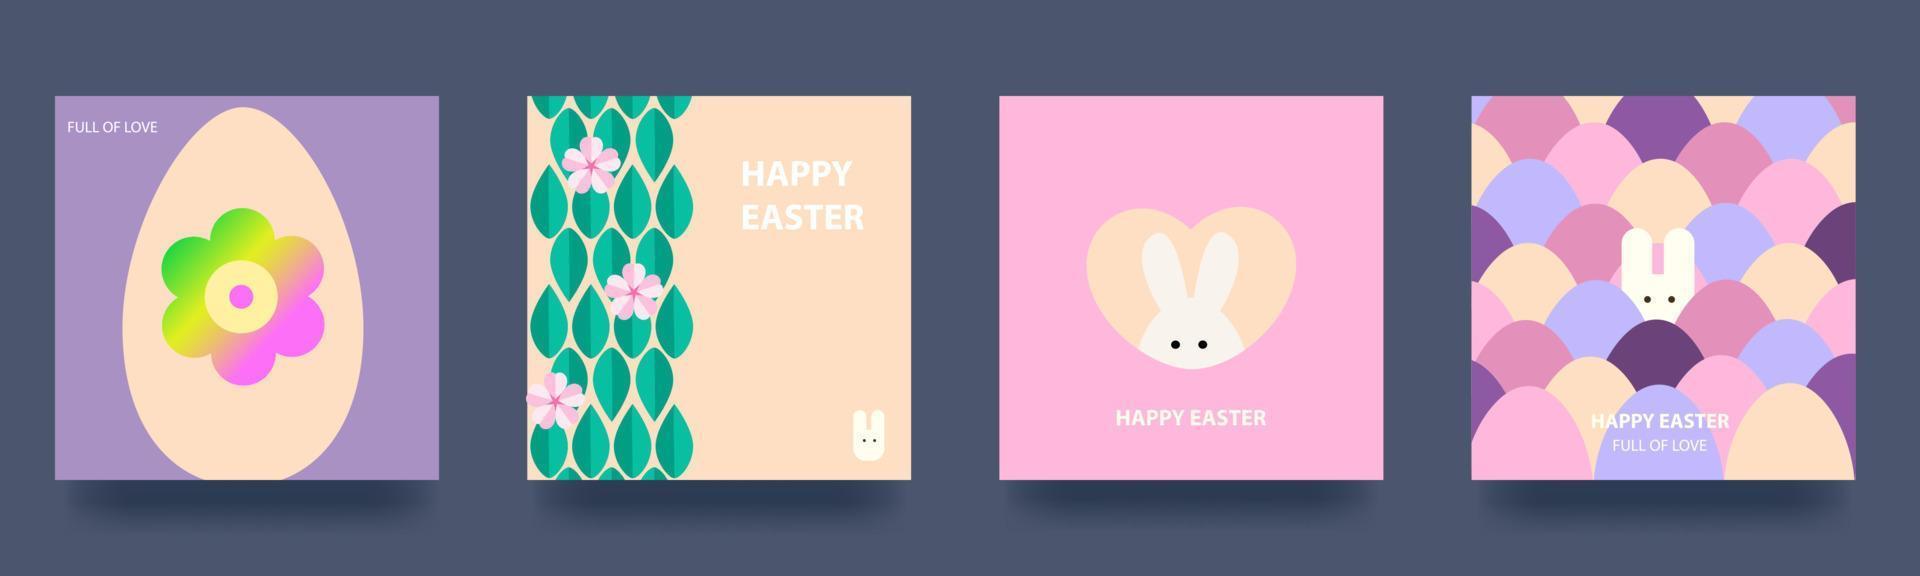 Happy easter. Set of spring holiday cards with rabbit, eggs and flowers. Backgrounds in pastel colors. Geometric style. Vector illustration